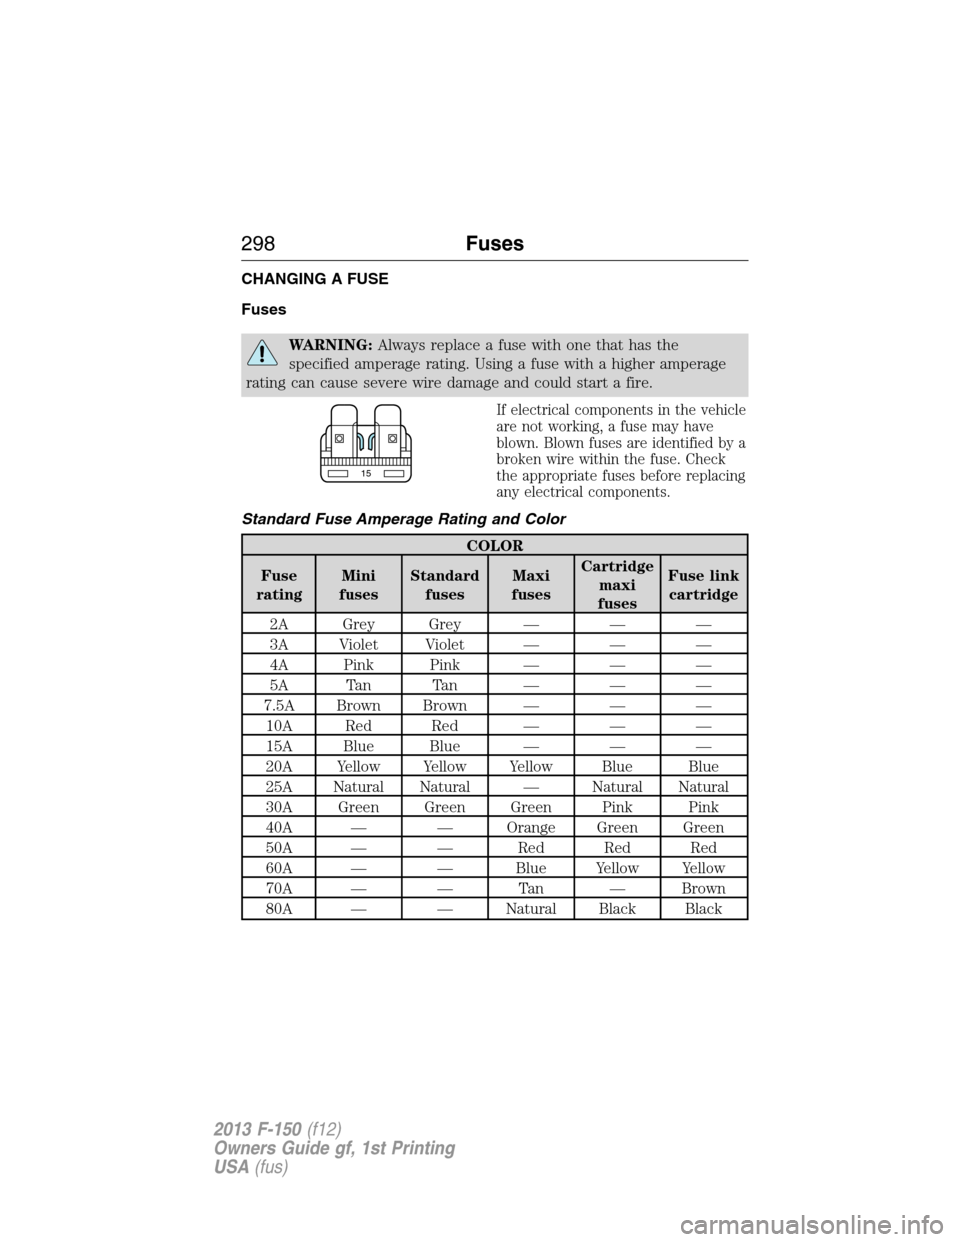 FORD F150 2013 12.G Owners Manual CHANGING A FUSE
Fuses
WARNING:Always replace a fuse with one that has the
specified amperage rating. Using a fuse with a higher amperage
rating can cause severe wire damage and could start a fire.
If 